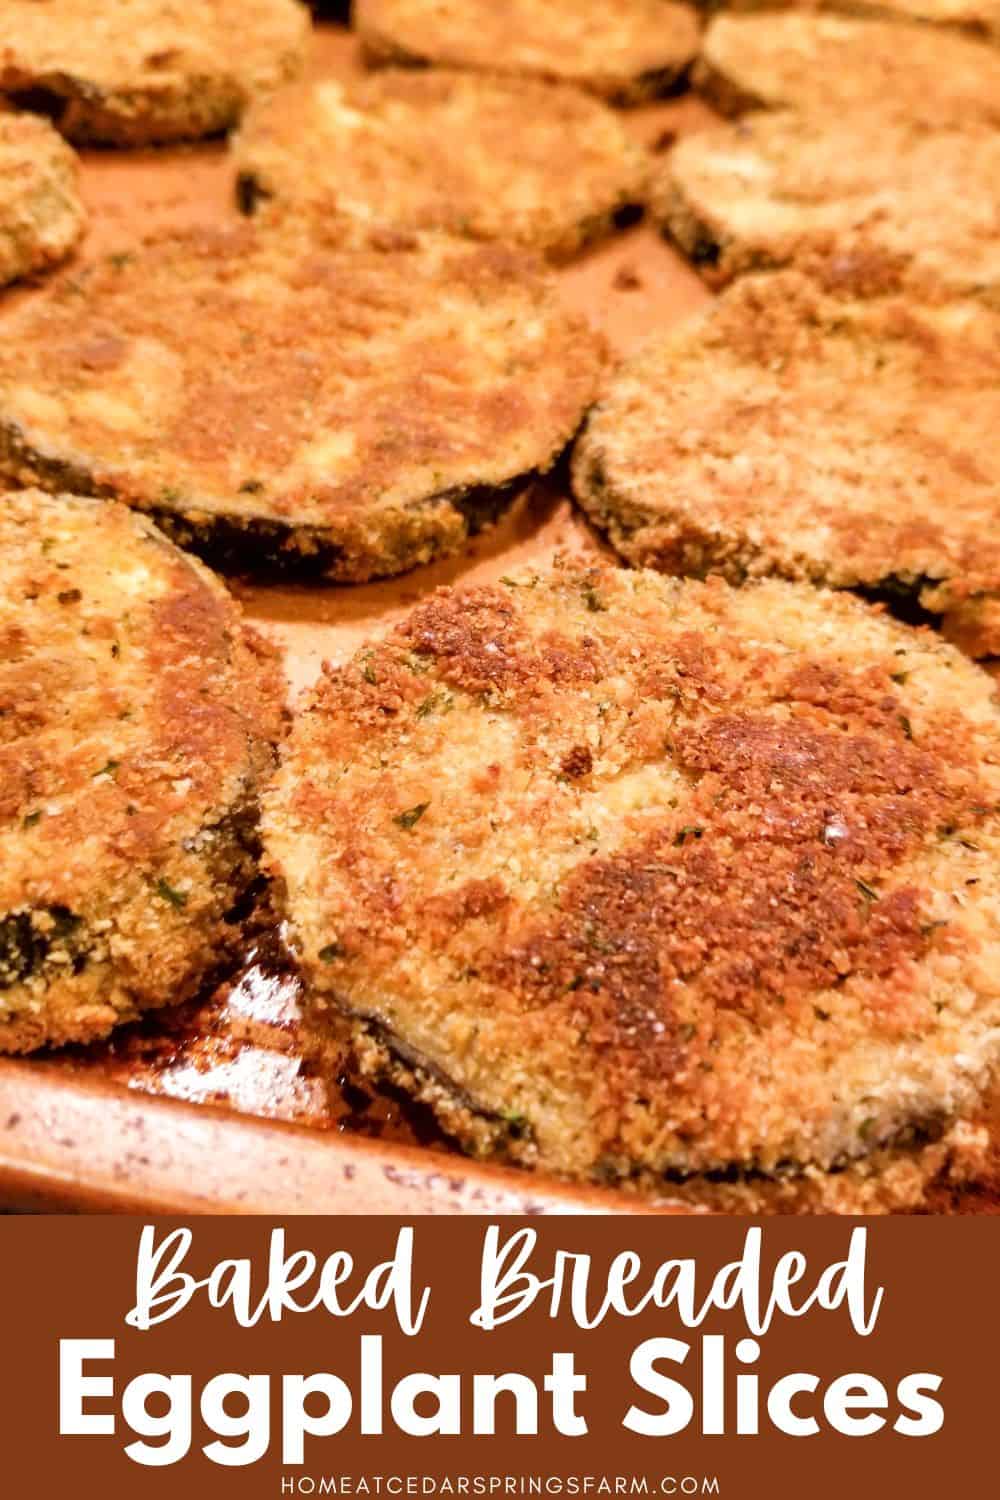 Breaded eggplant on a baking sheet with text overlay.